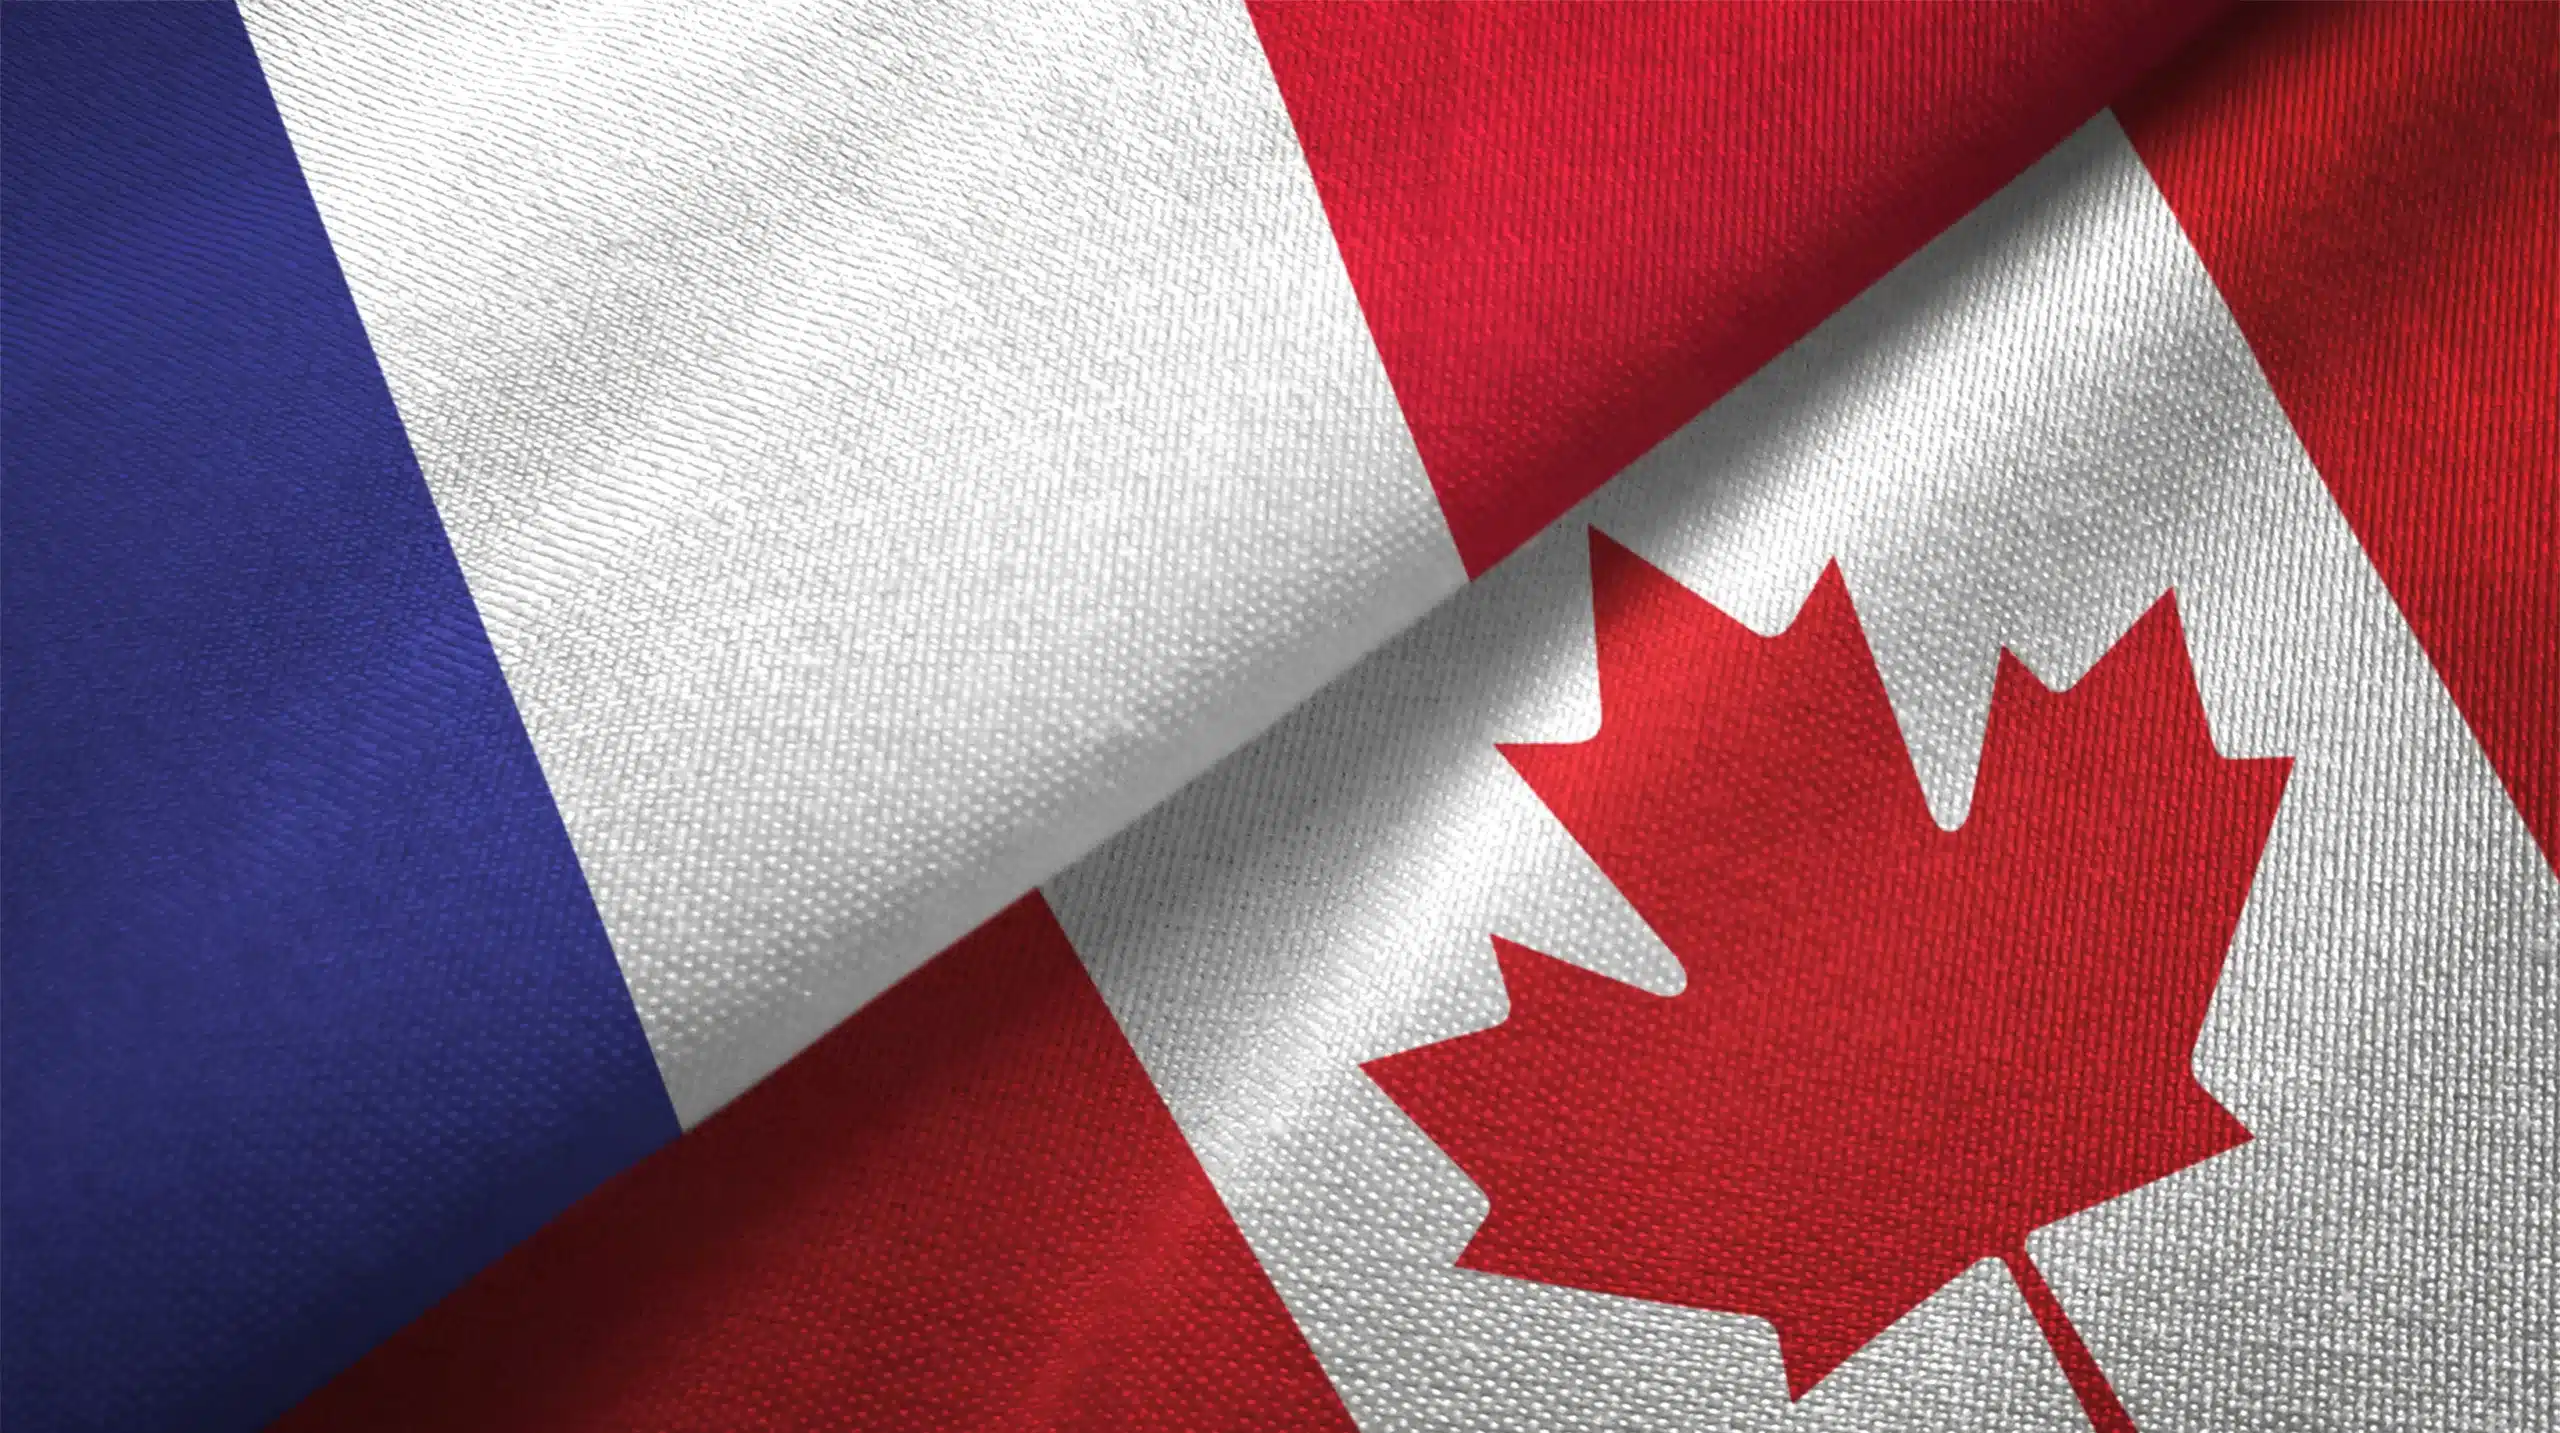 What are the differences between European and Canadian French?